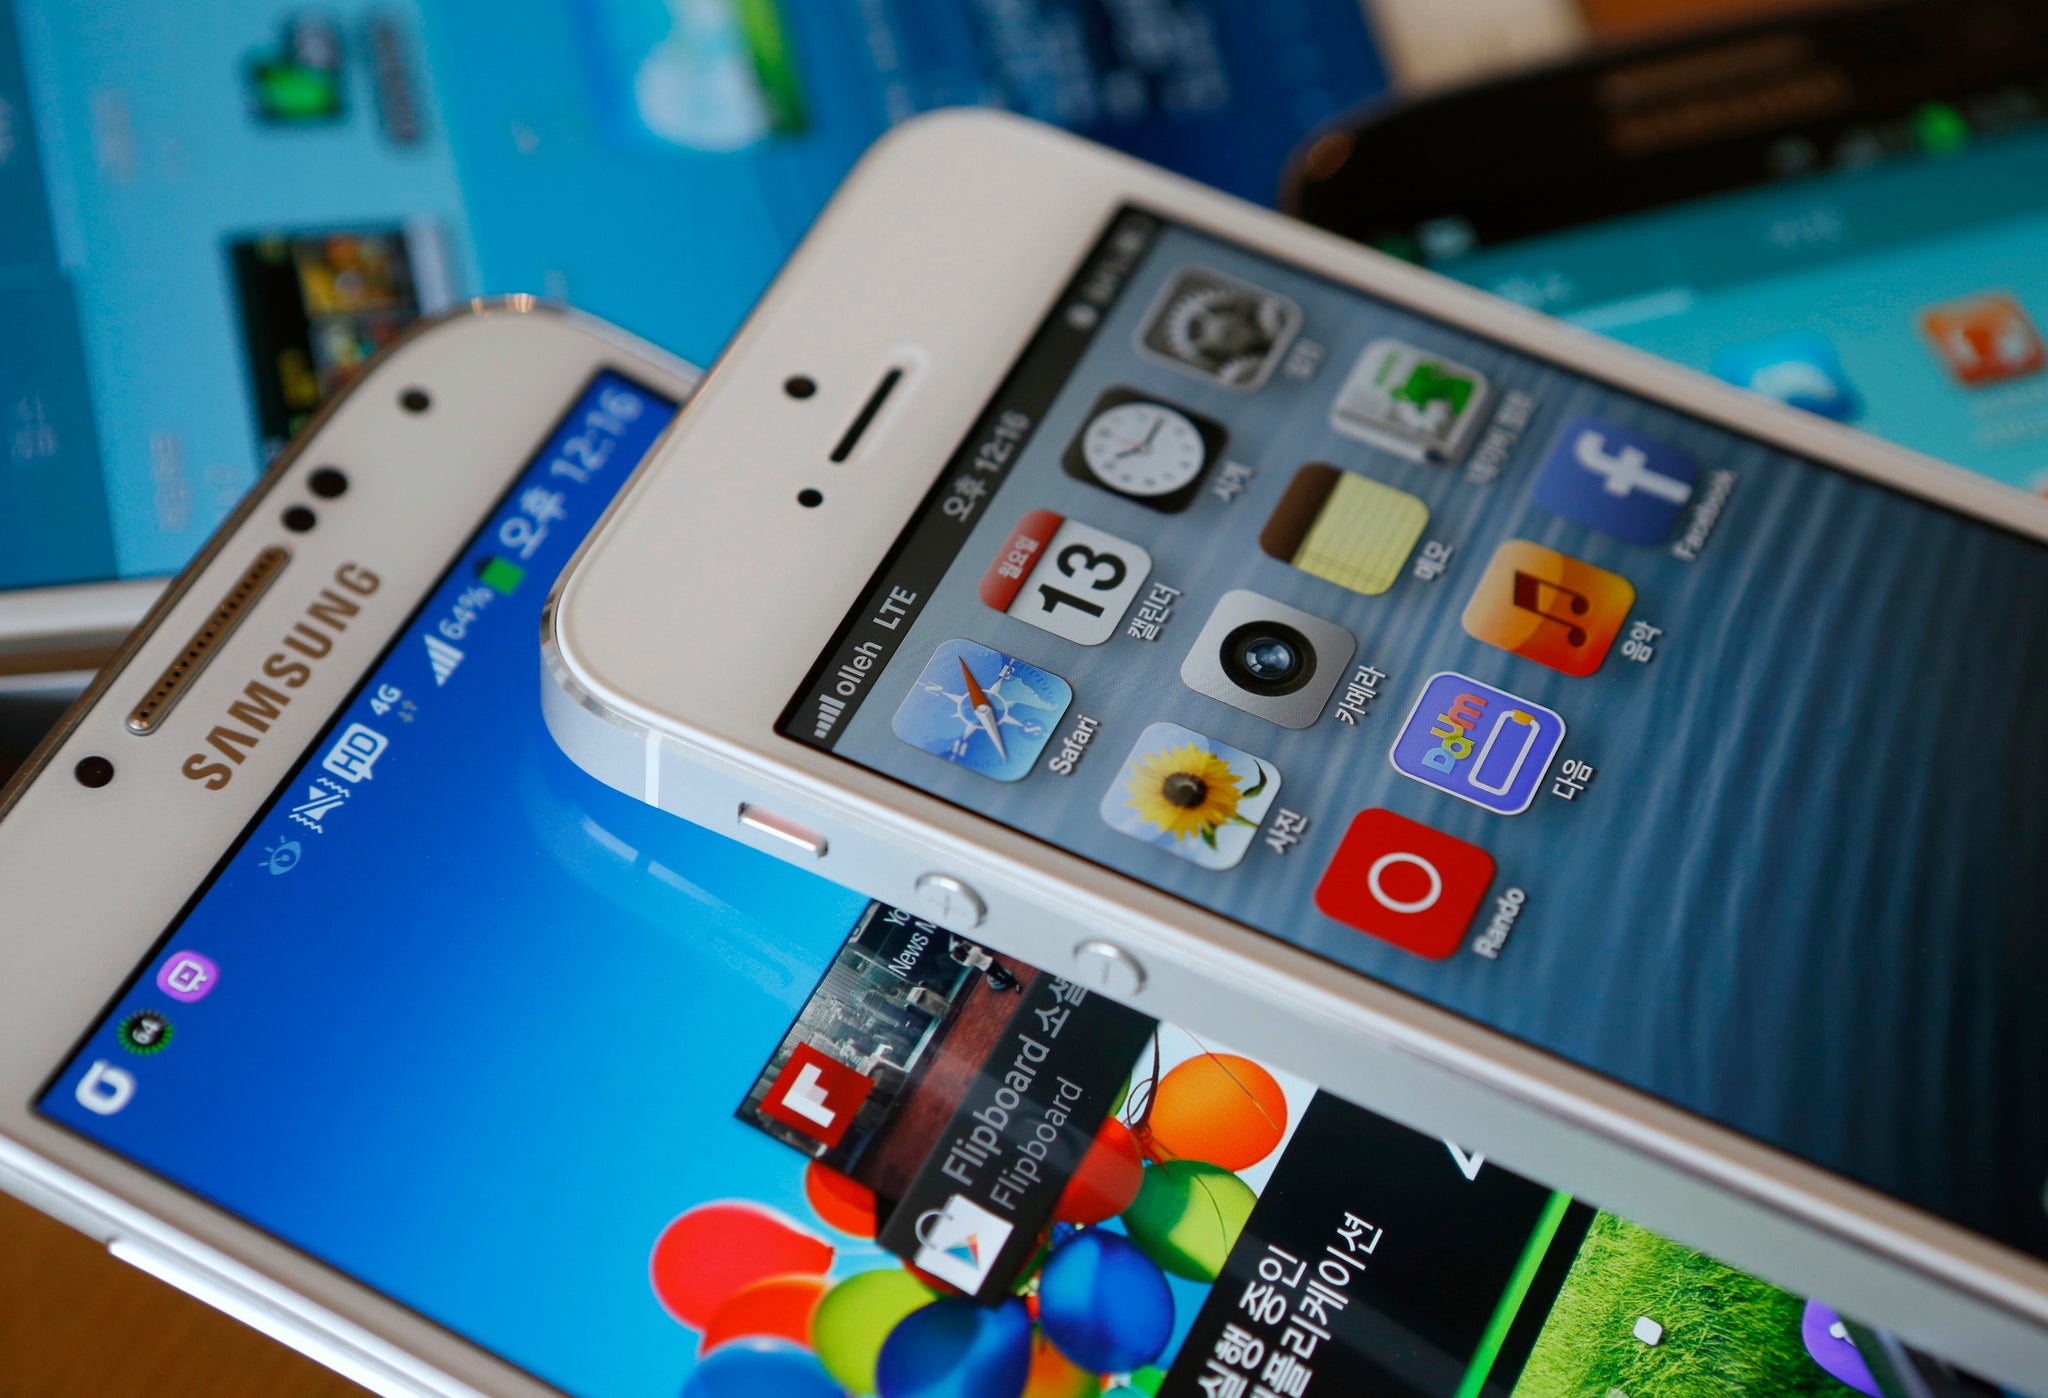 An iPhone 5 and Galaxy S4.